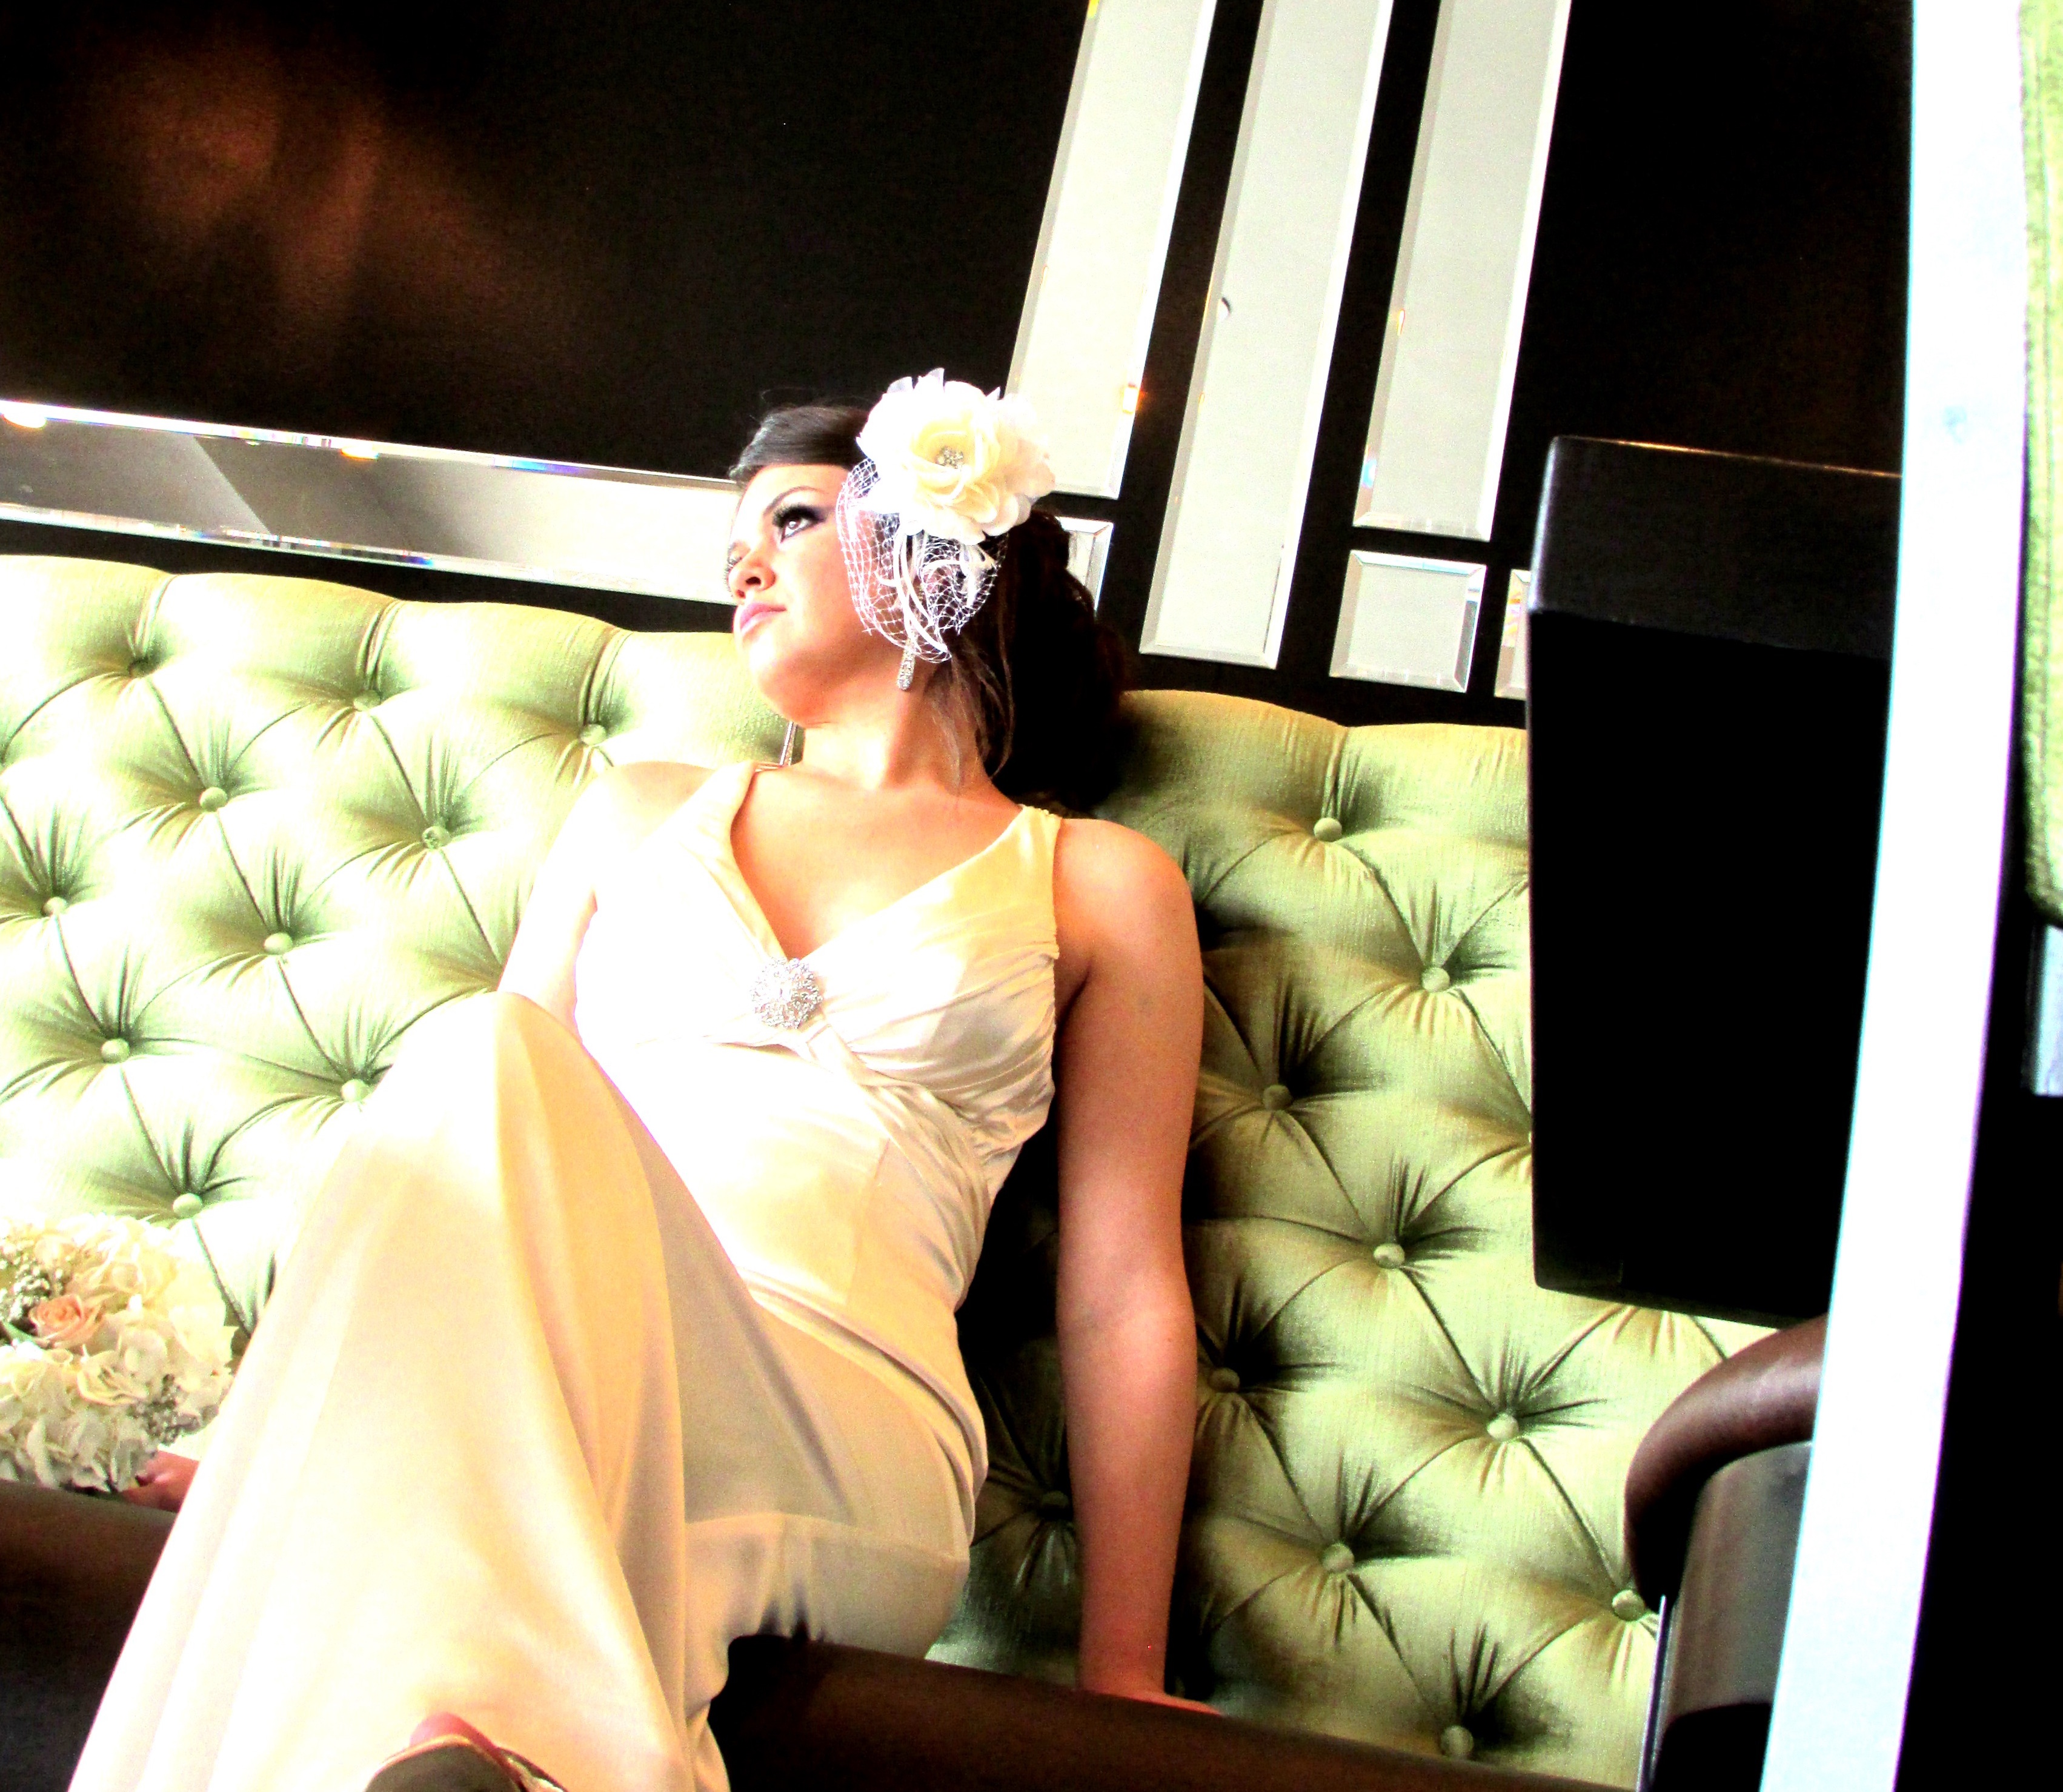 A bride in a white wedding dress seated in a booth at Flavor on Main.